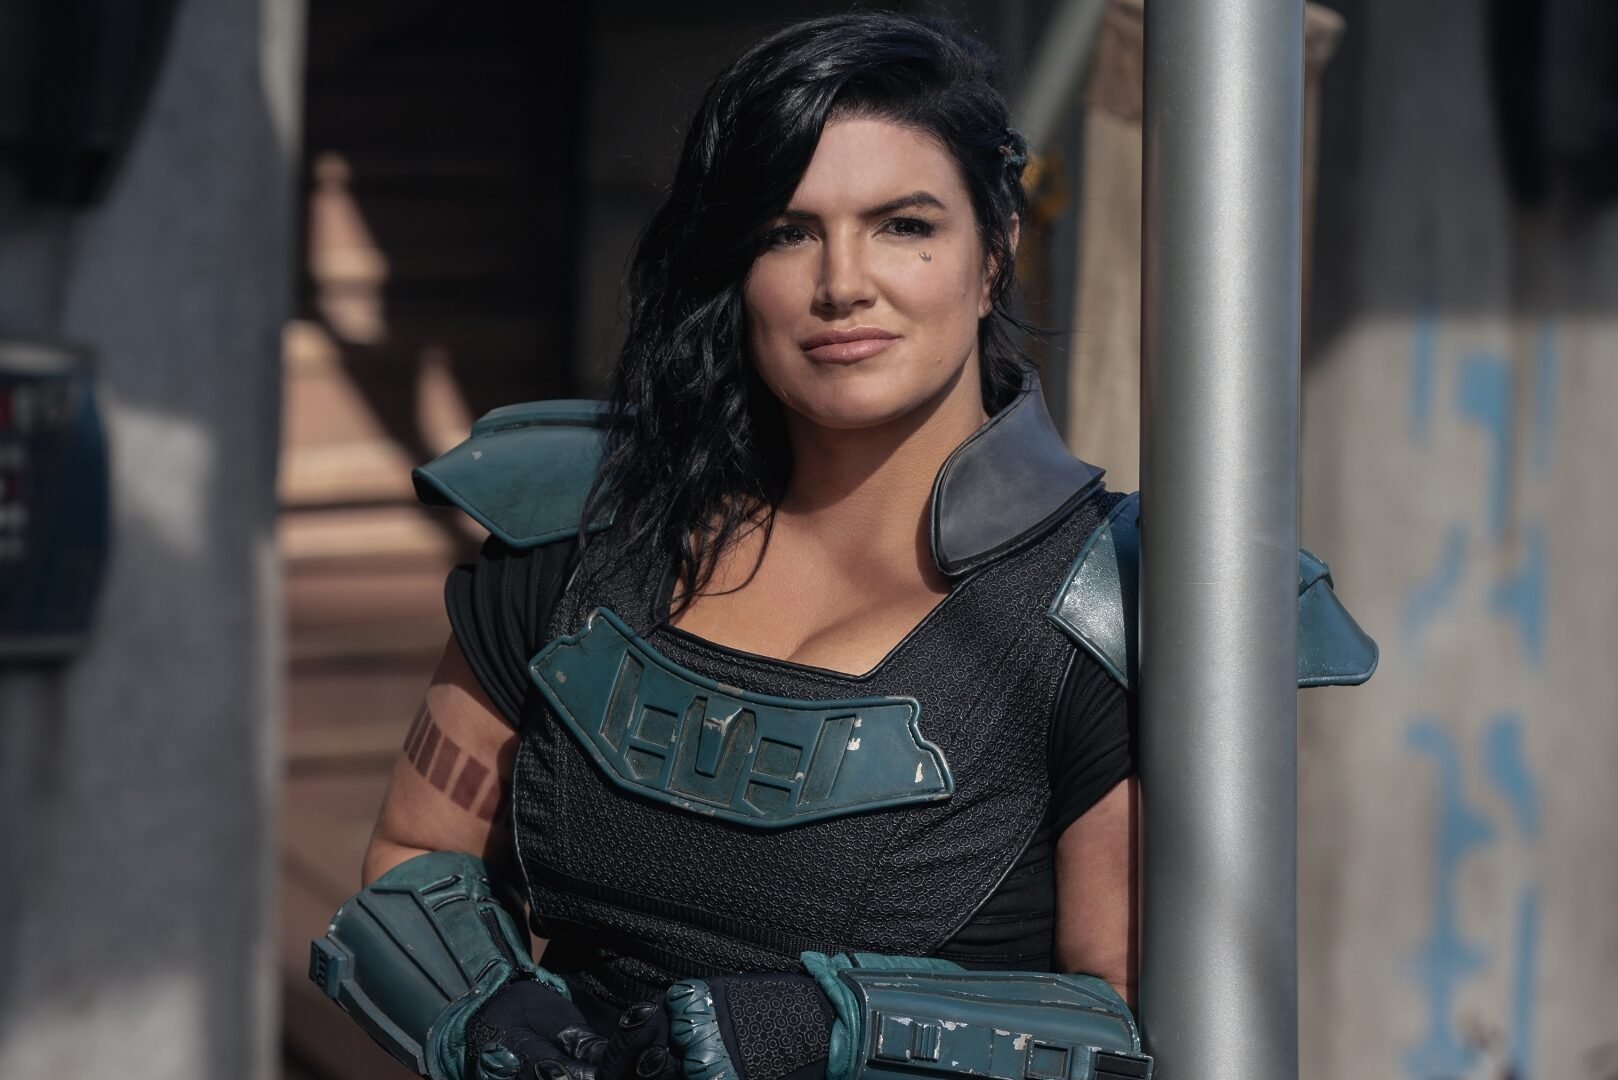 Gina Carano Explains Why She’s Risking Getting Fired From The Mandalorian